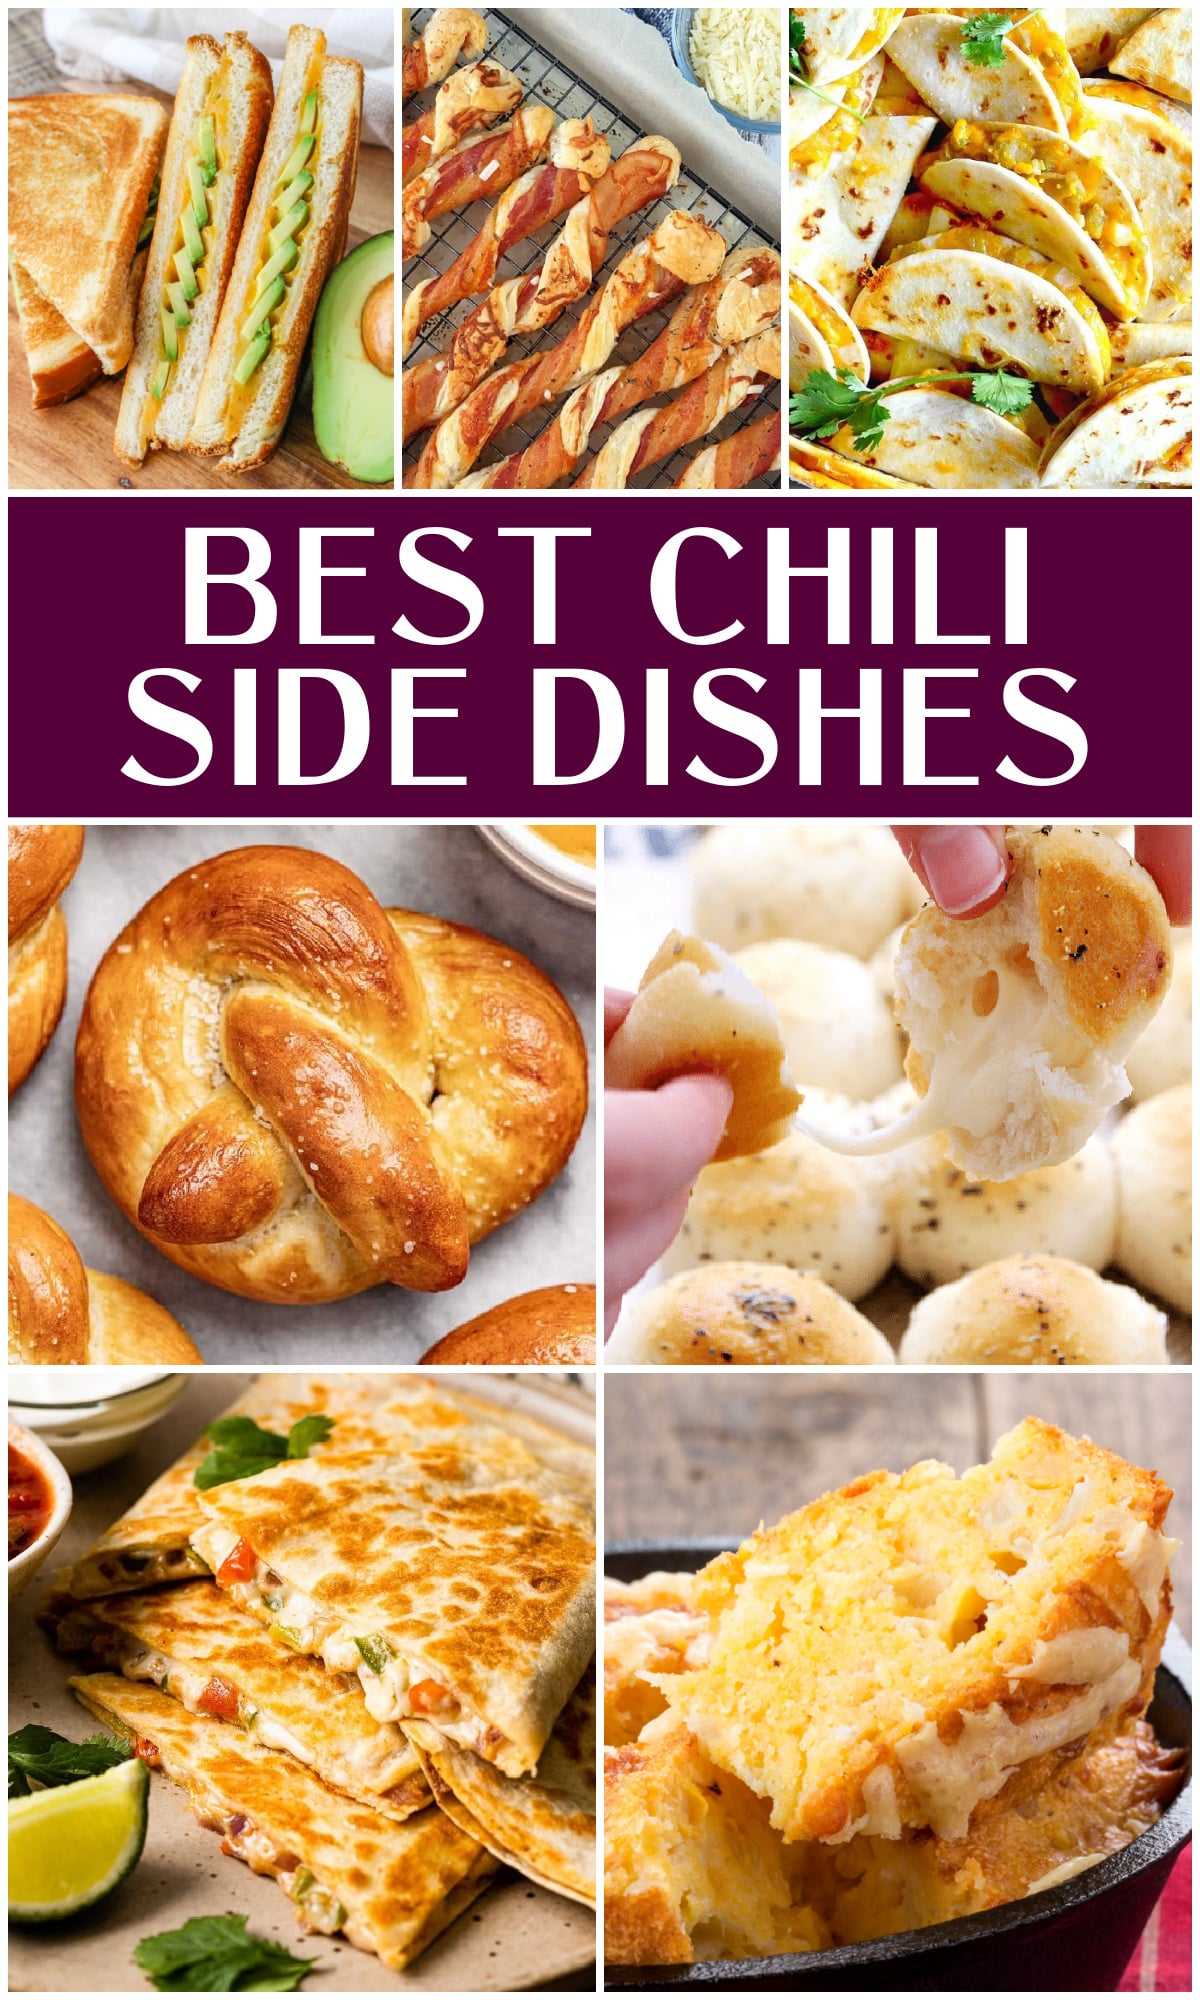 Best Chili Side Dishes: Trying to decide what to serve with chili? Check out this collection of awesome chili side dish and topping ideas. via @jugglingactmama